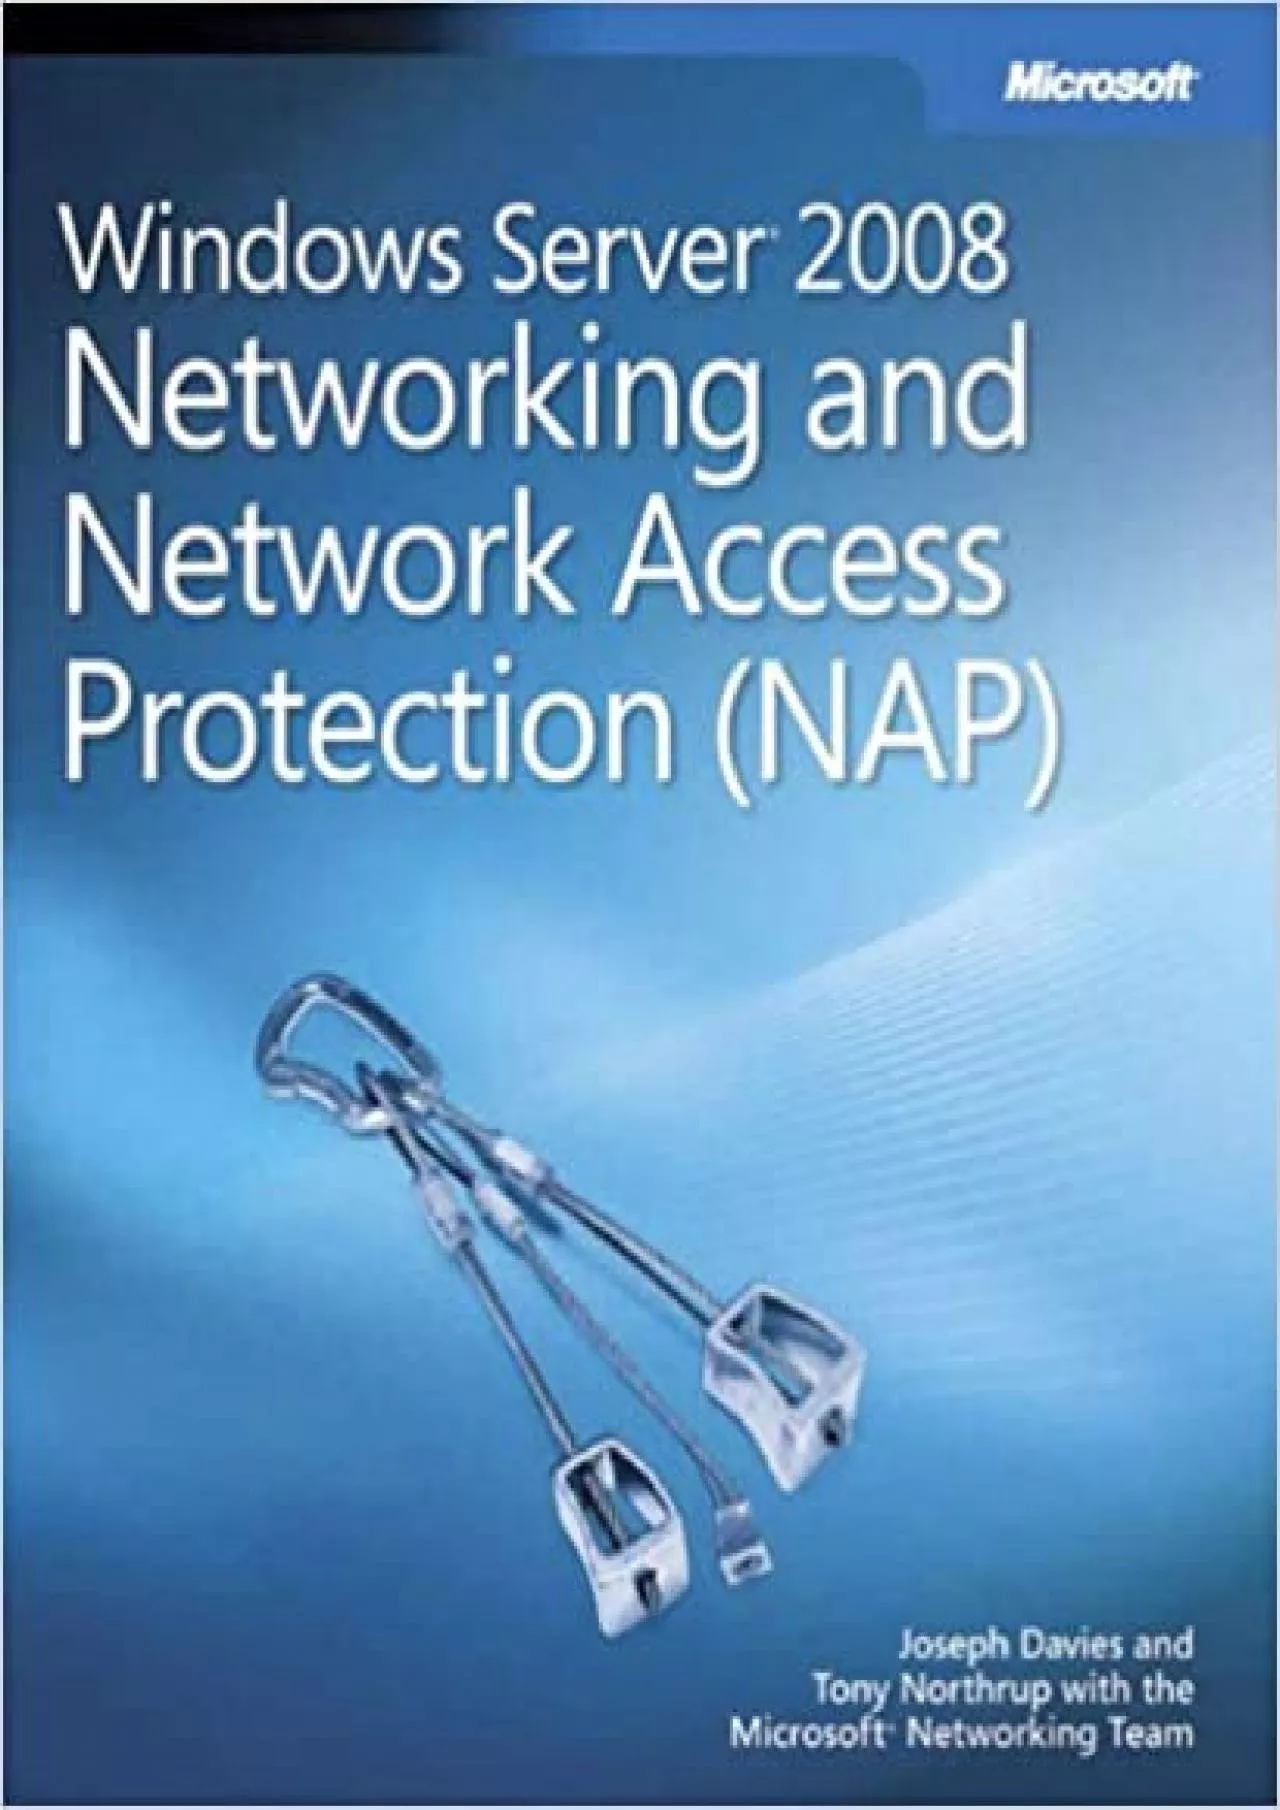 Windows Server 2008 Networking and Network Access Protection NAP